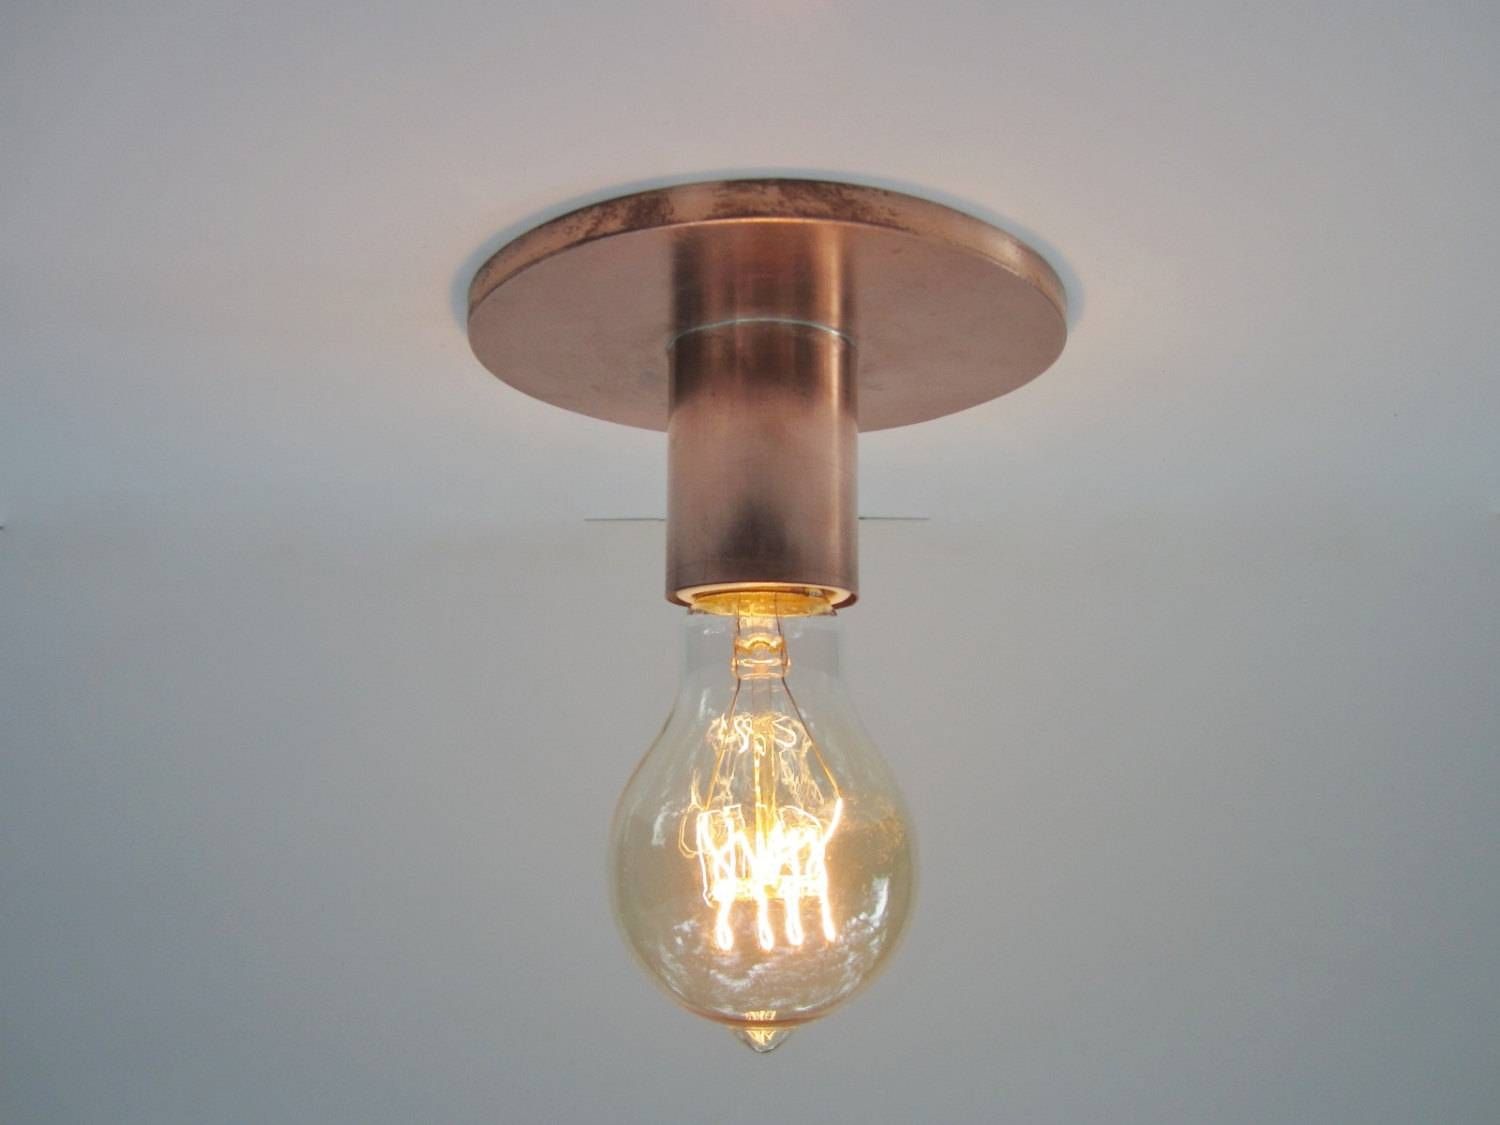 Flush Mount Ceiling Light Or Wall Sconce Industrial Lighting Within Bare Bulb Lights Fixtures (View 4 of 15)